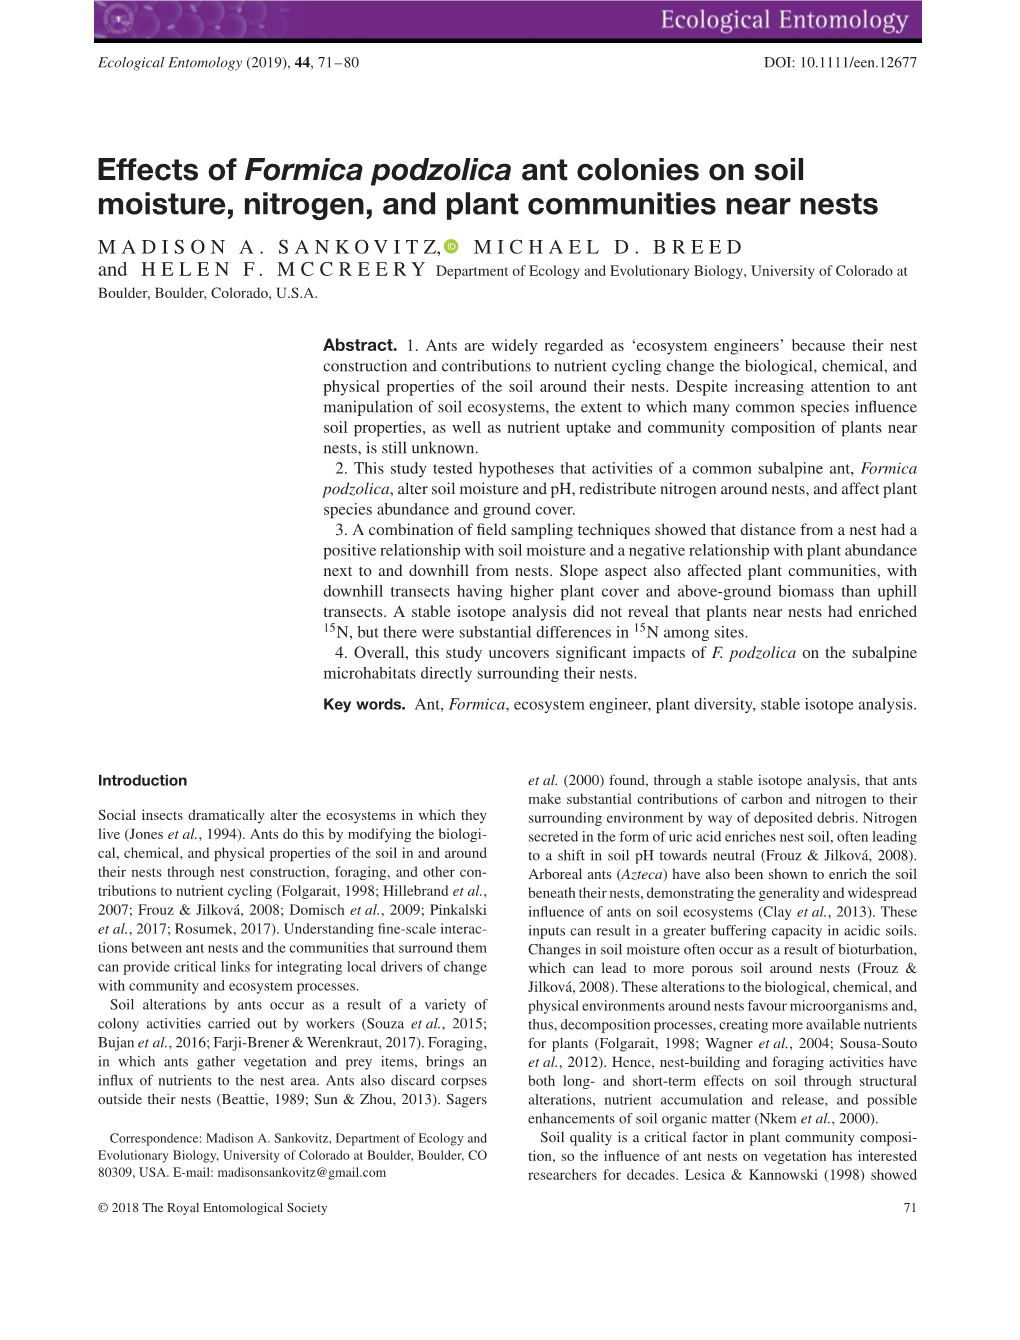 Effects of Formica Podzolica Ant Colonies on Soil Moisture, Nitrogen, and Plant Communities Near Nests MADISON A